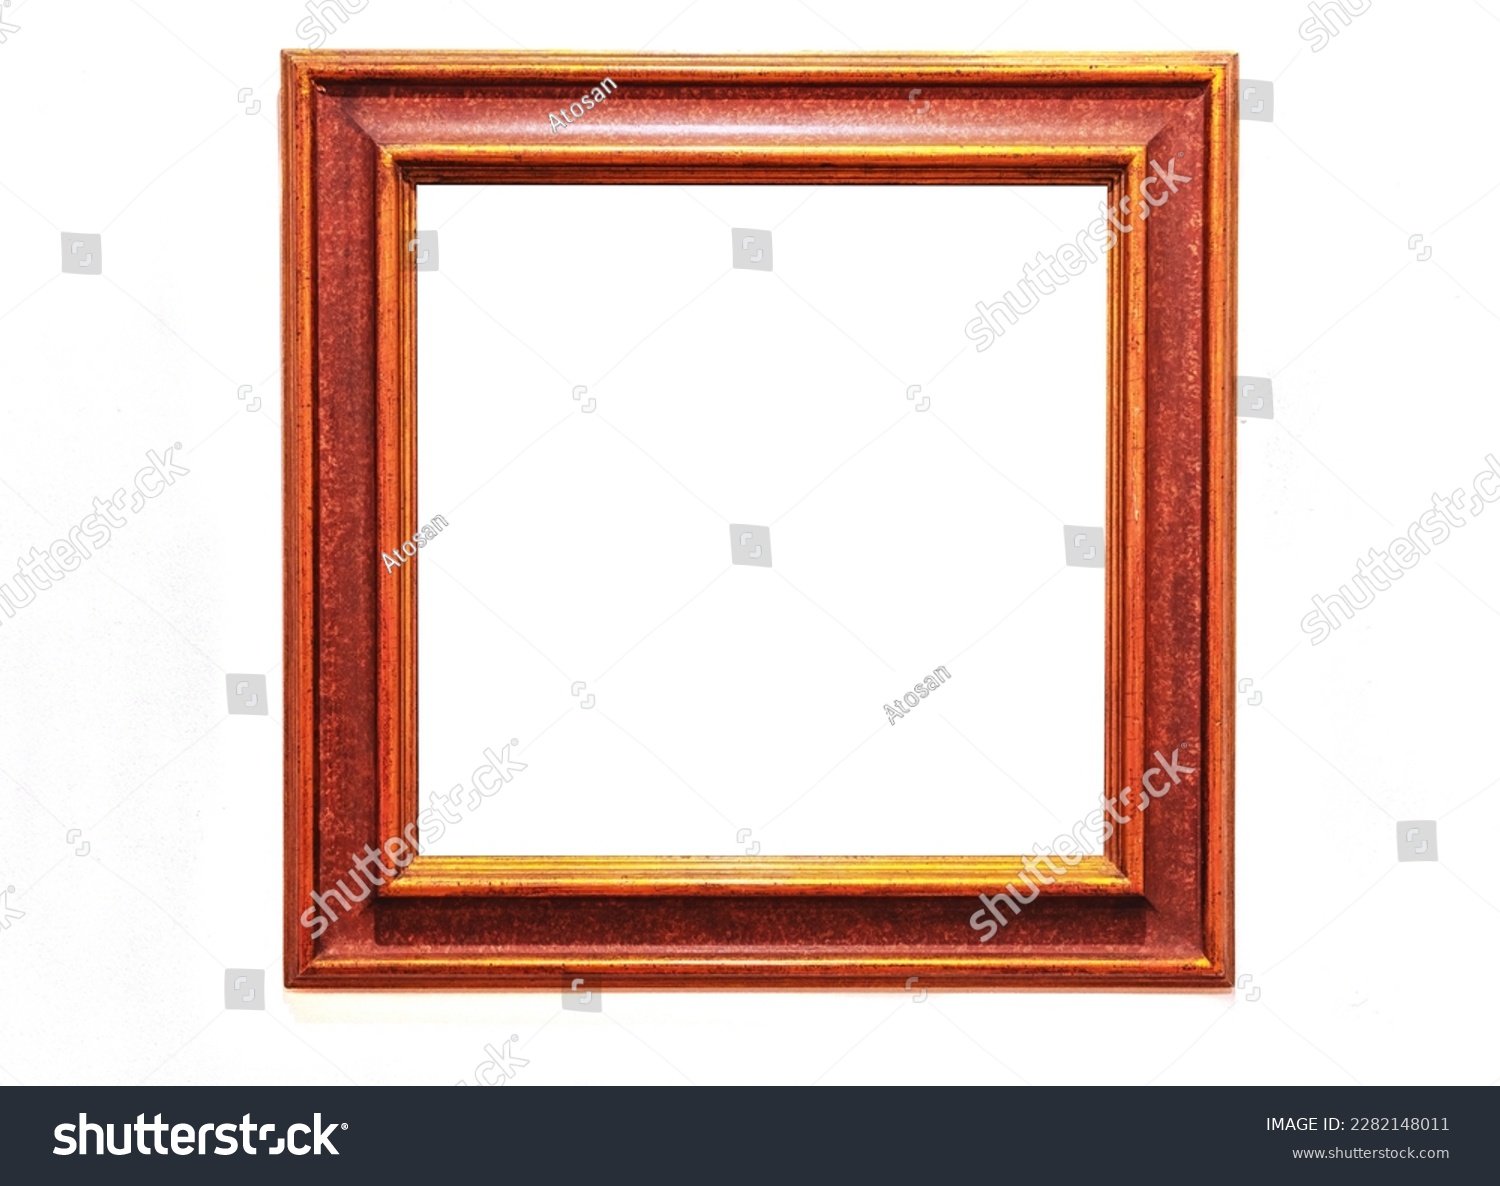 Ancient wooden photo frame isolated on white background. #2282148011